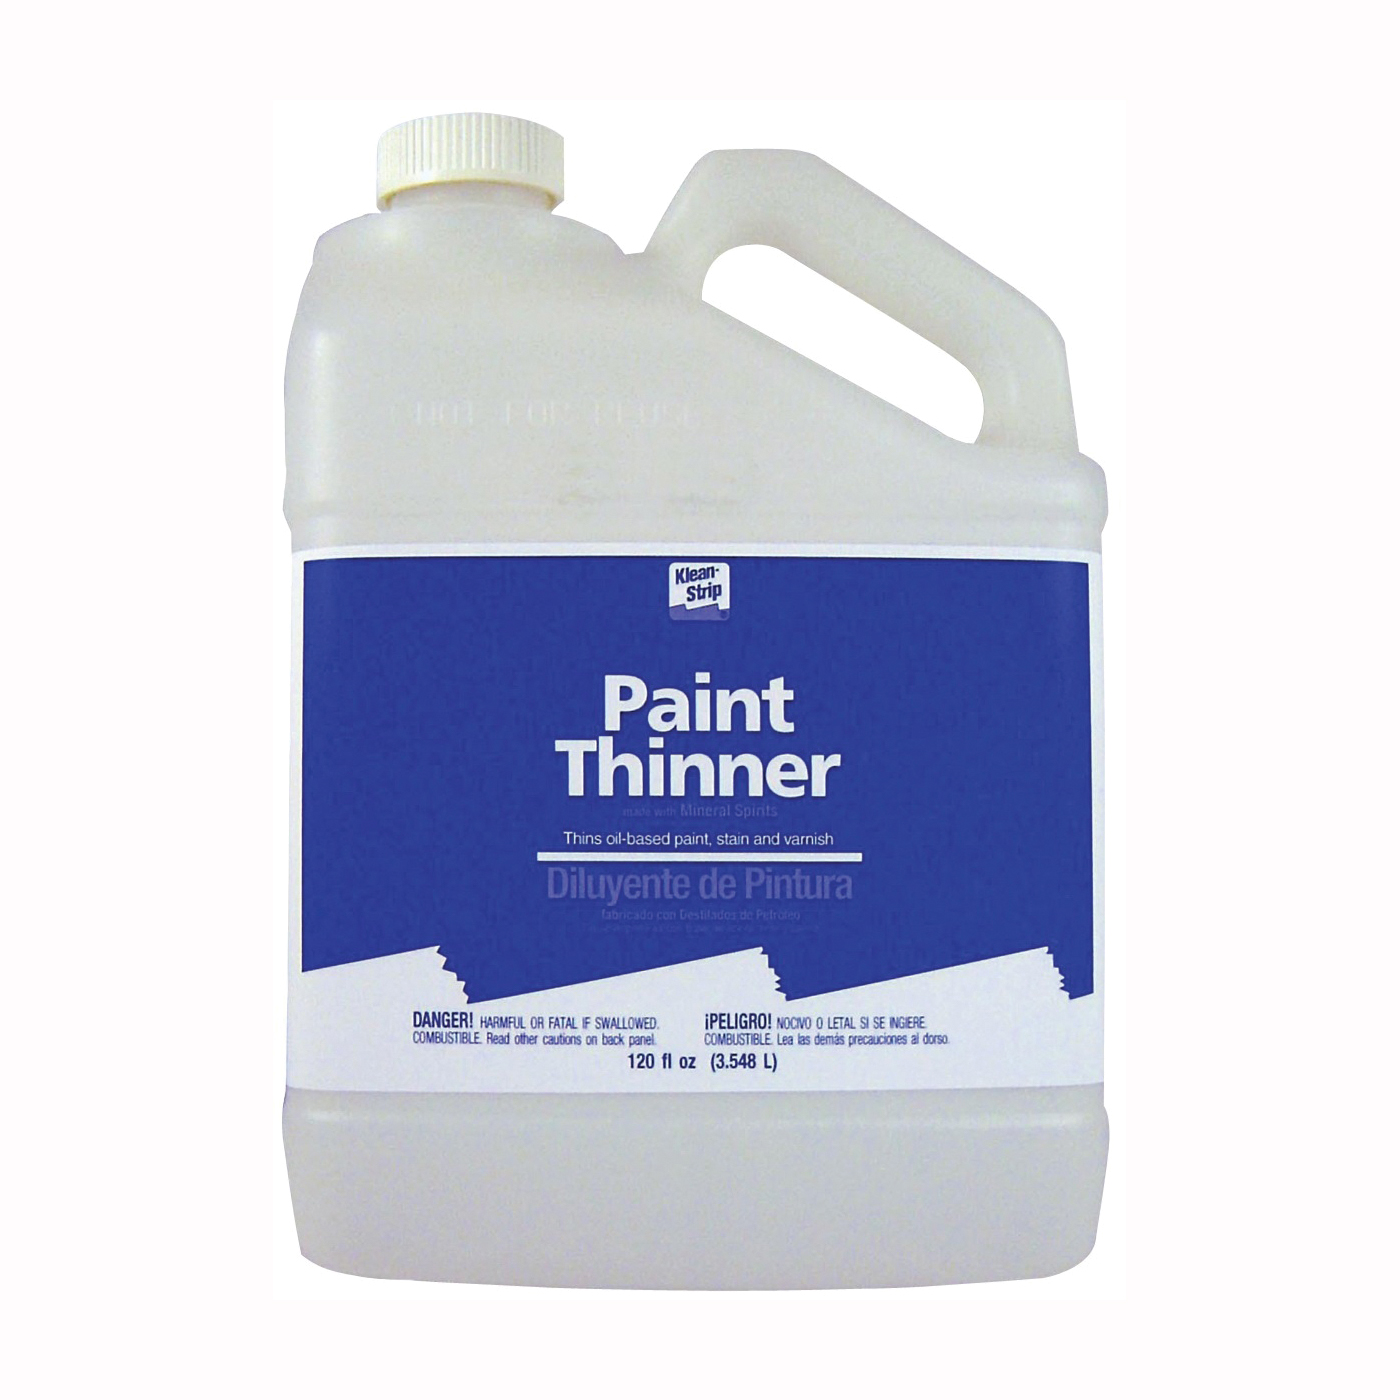 GKPT94400 Paint Thinner, Liquid, Free, Clear, Water White, 1 gal, Can